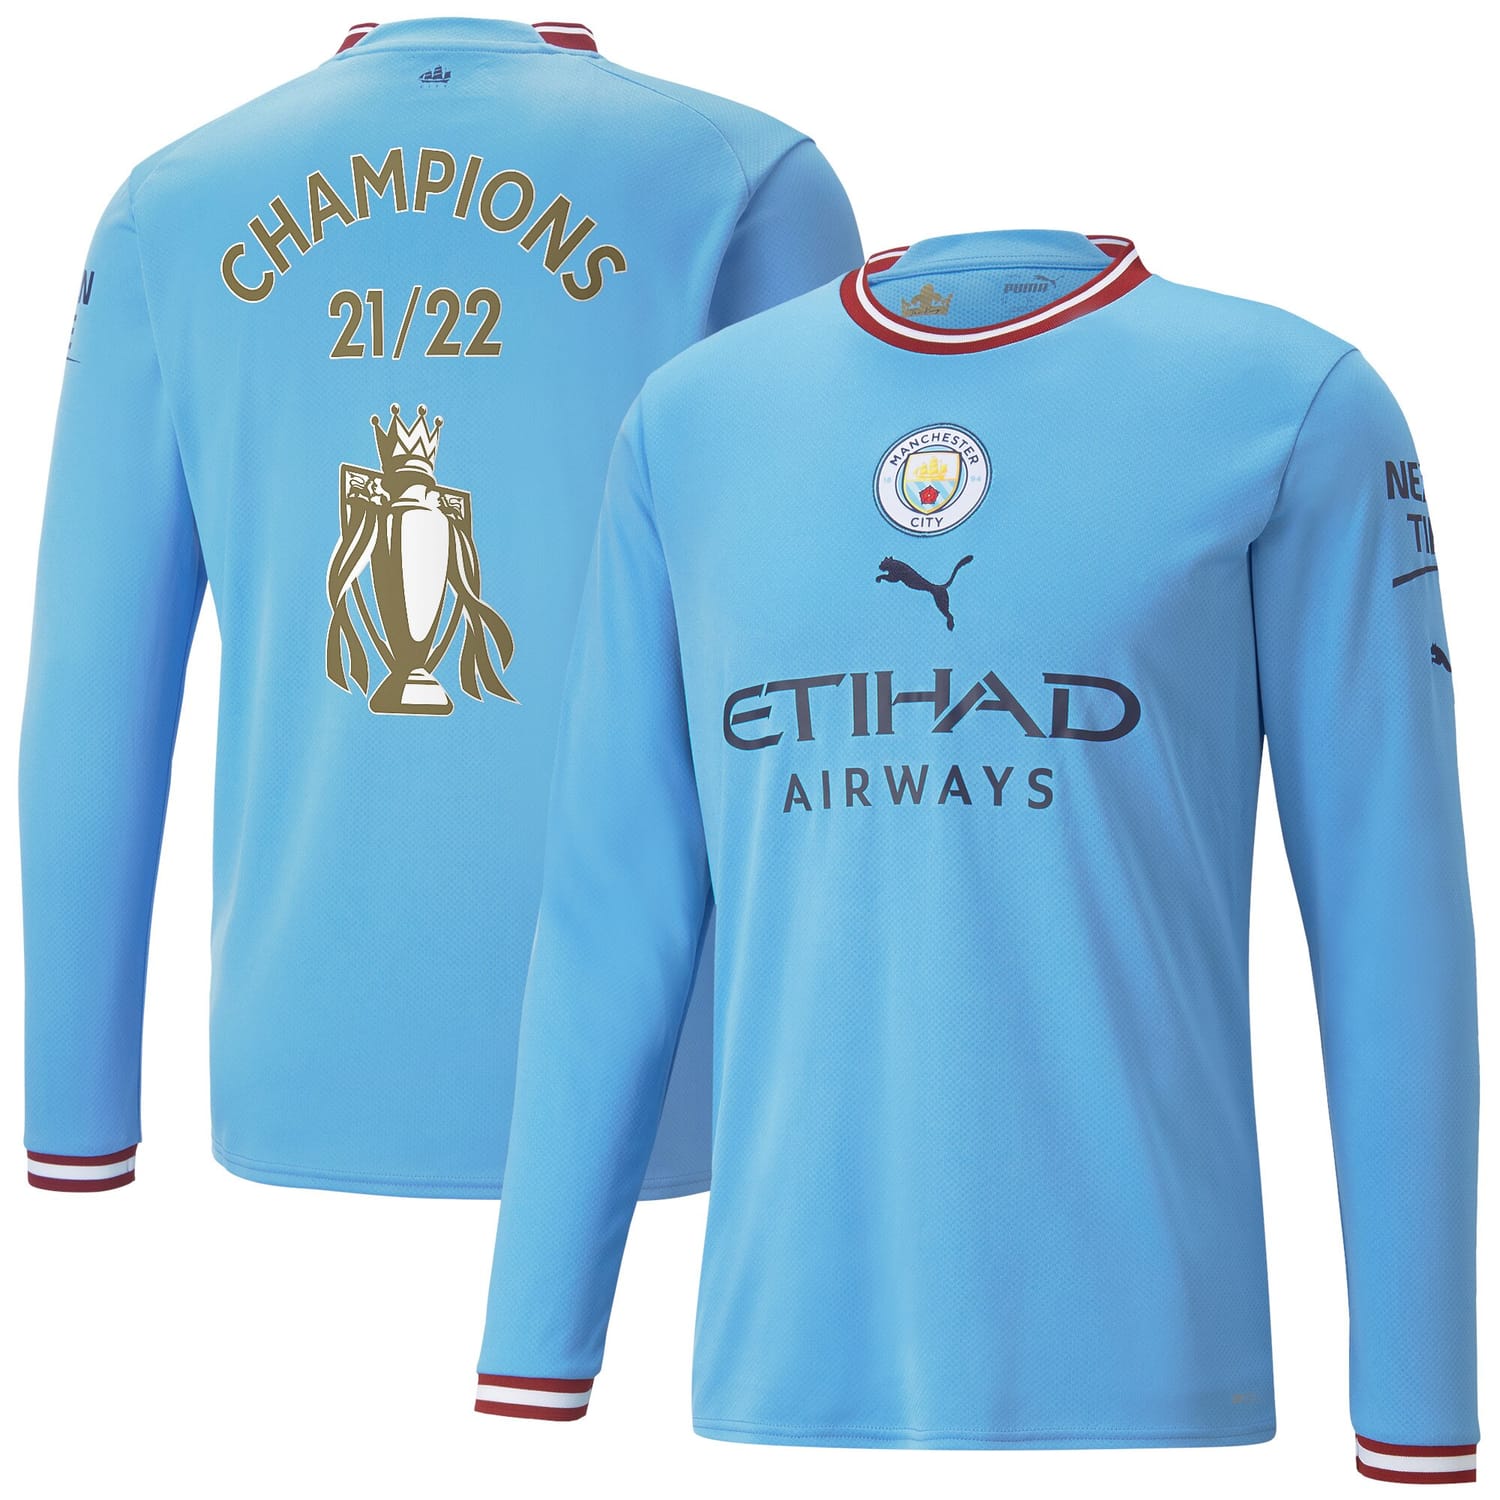 Premier League Champions Manchester City Home Jersey Shirt Long Sleeve 2022-23 player Champions 22 printing for Men